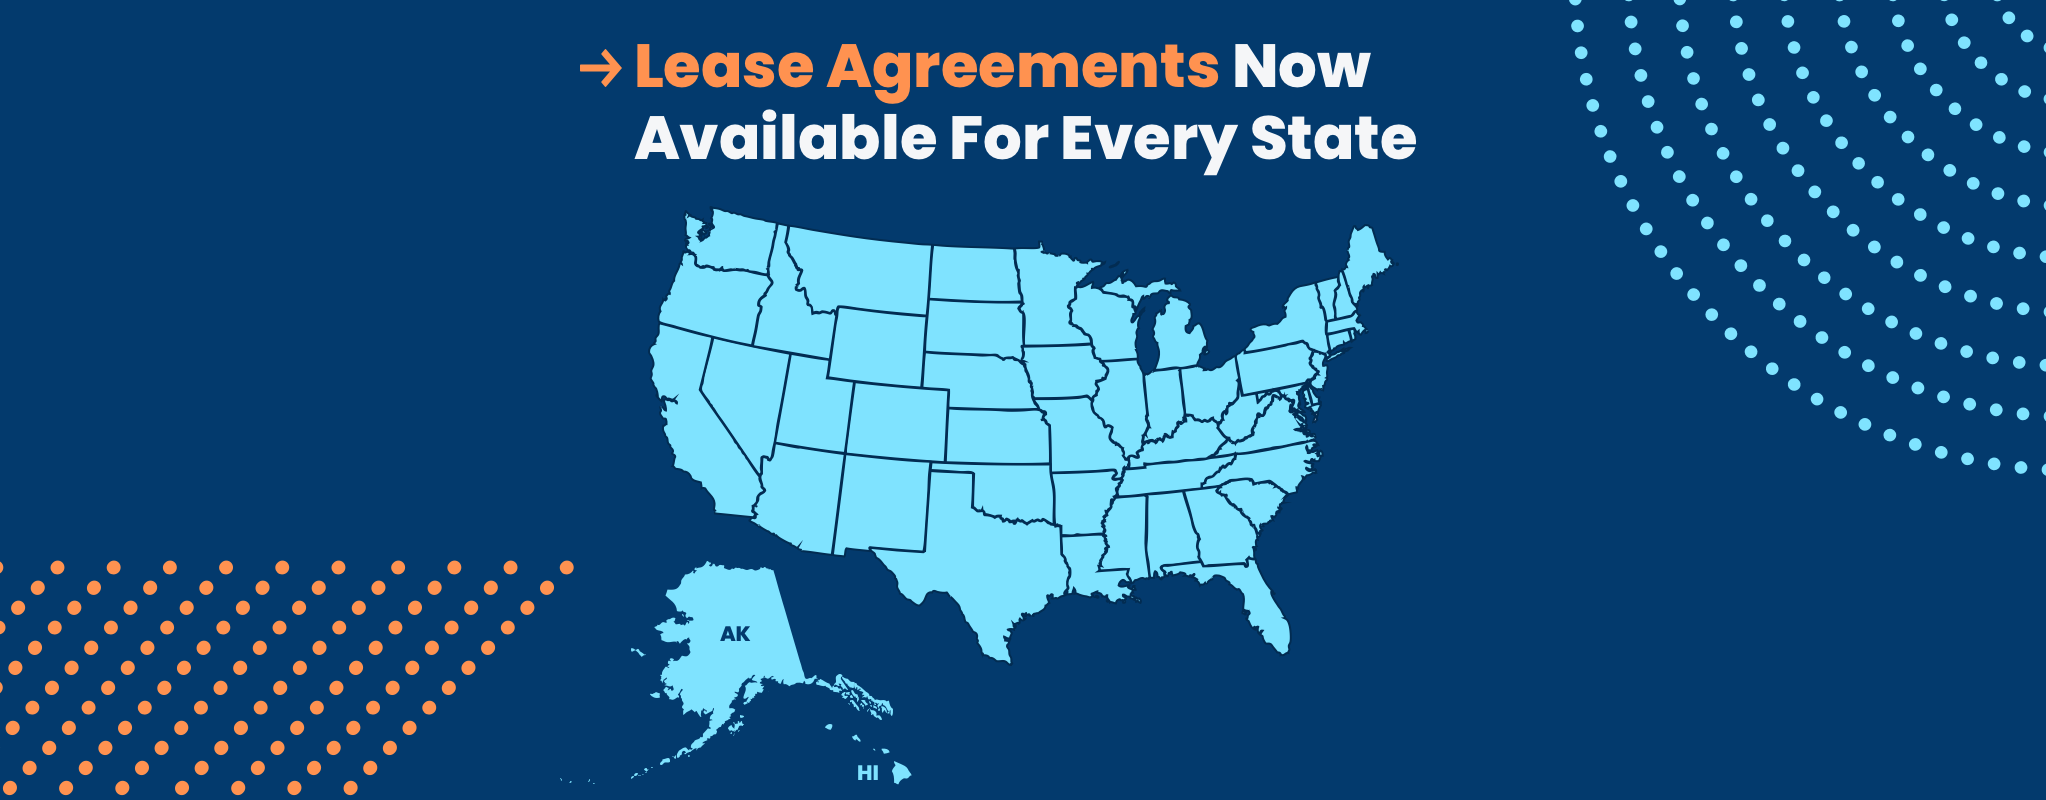 State Specific Lease Agreements